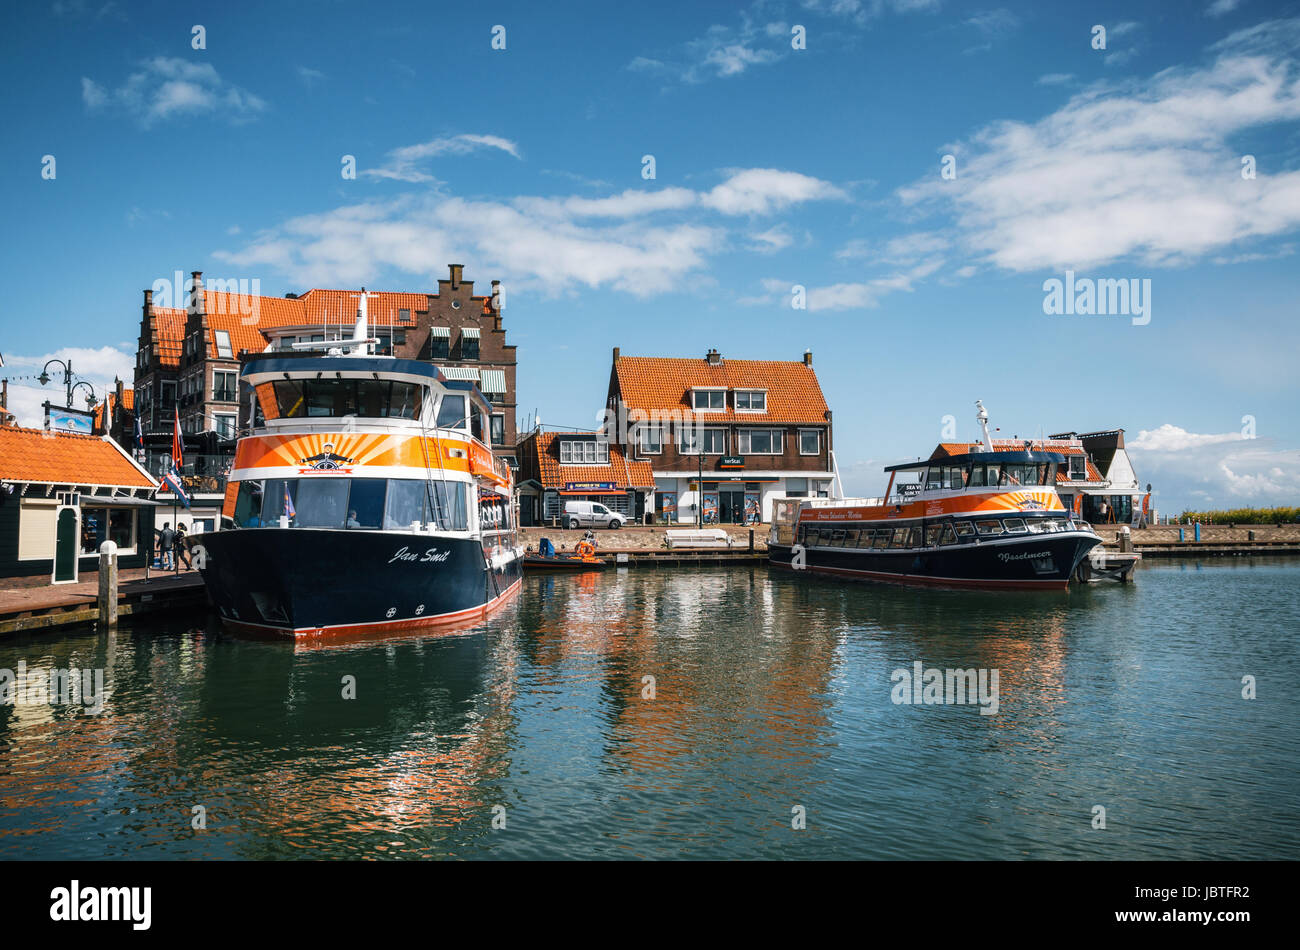 Volendam, Netherlands - 26 April, 2017: Harbor of Volendam with colorful tourist boats and promenade at sunny day, Netherlands. Volendam is a popular  Stock Photo